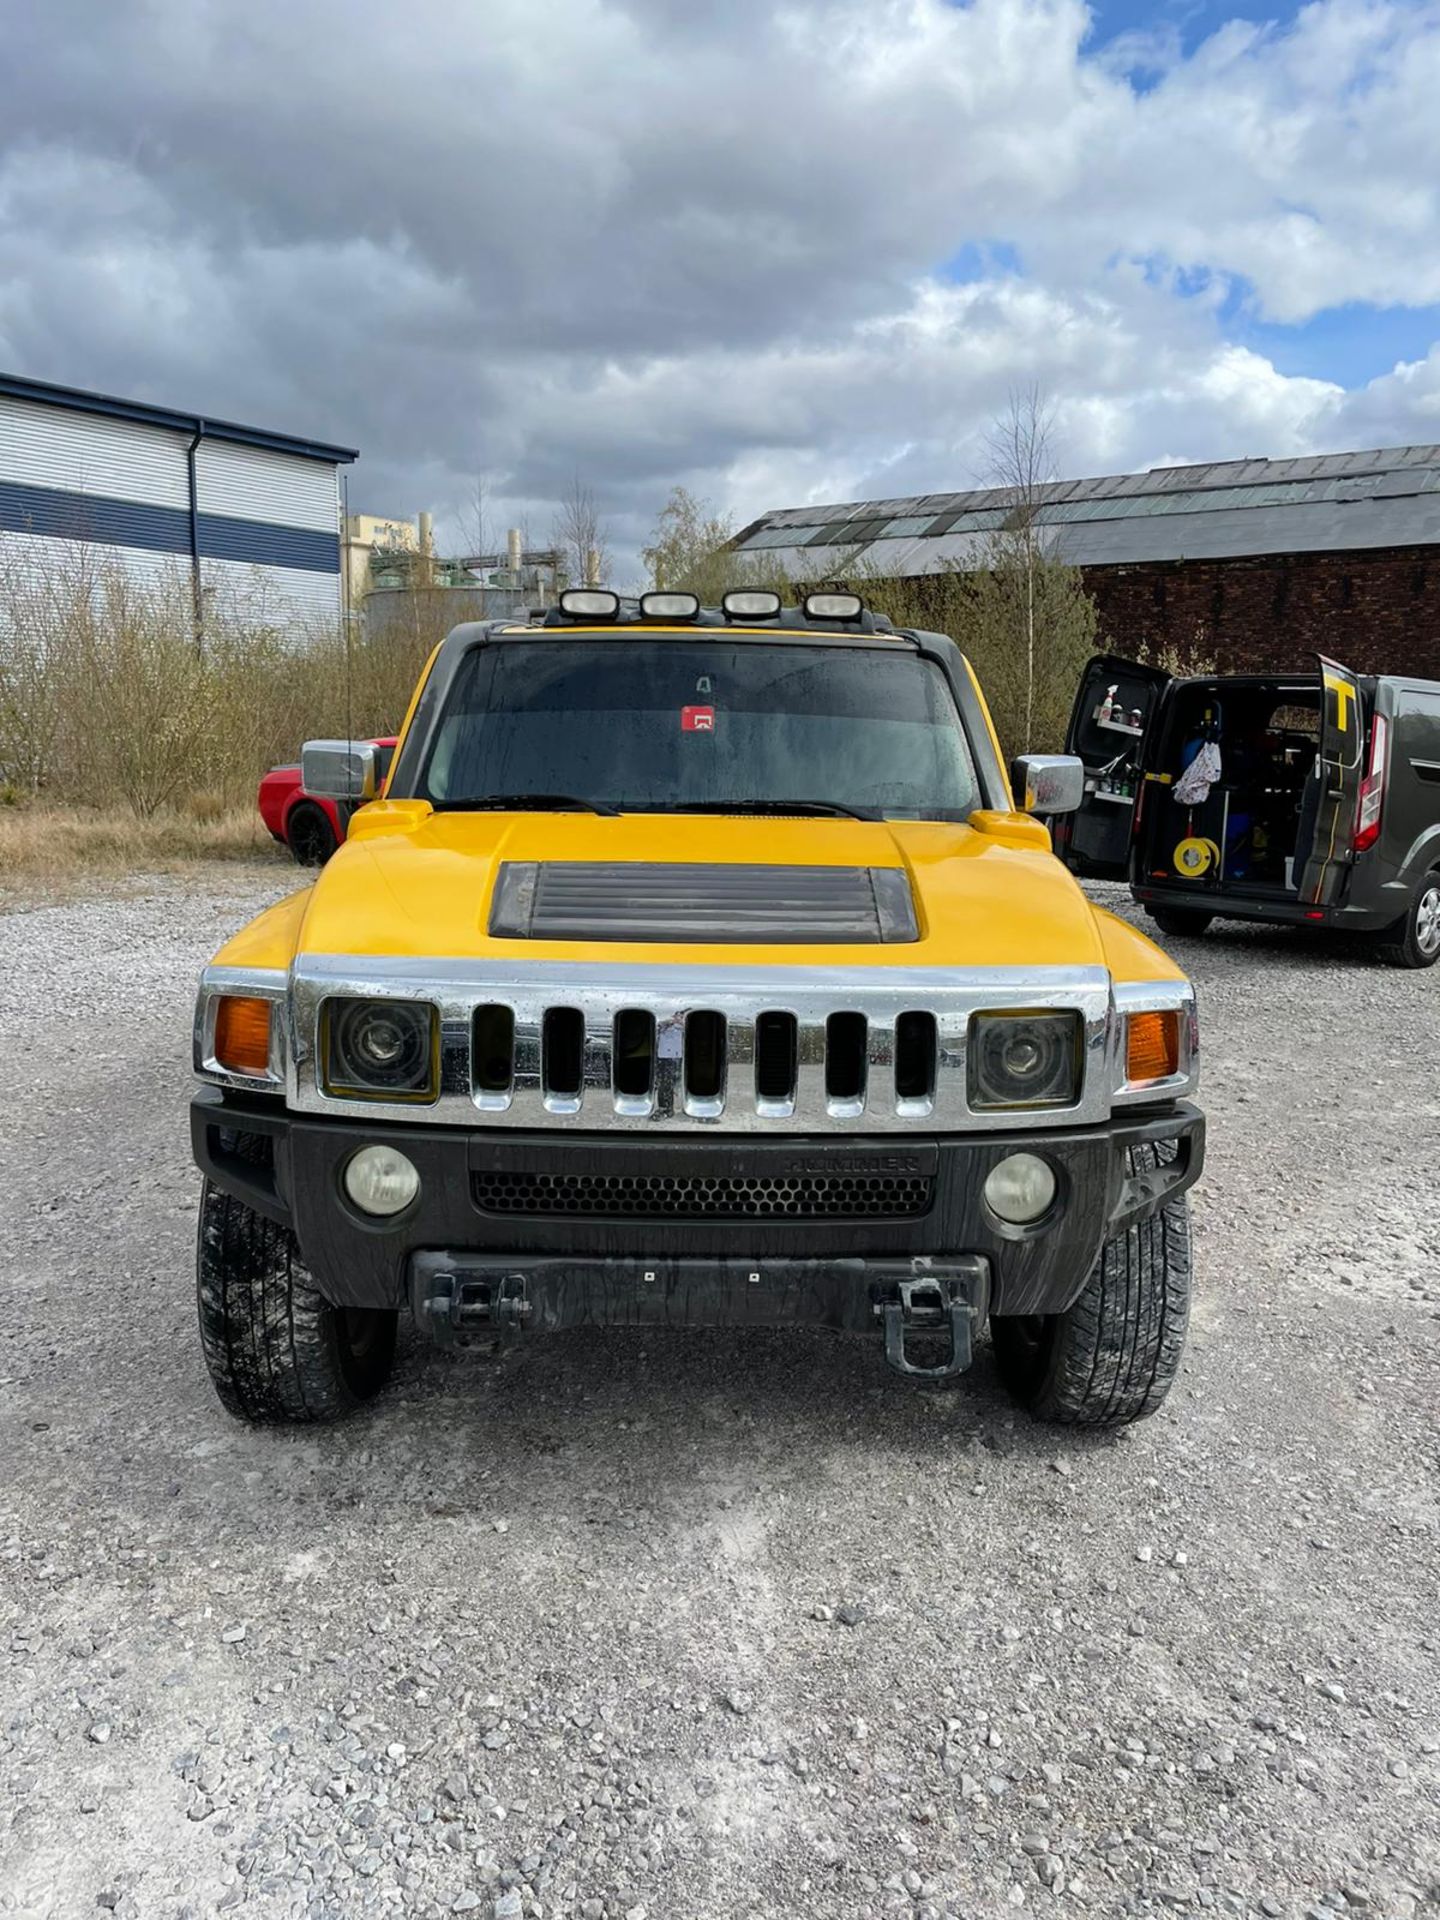 HUMMER H3 90,000 KM YELLOW WITH BLACK, UPGRADED WHEELS AND SUSPENSION, , YEAR 2006 - Image 2 of 10